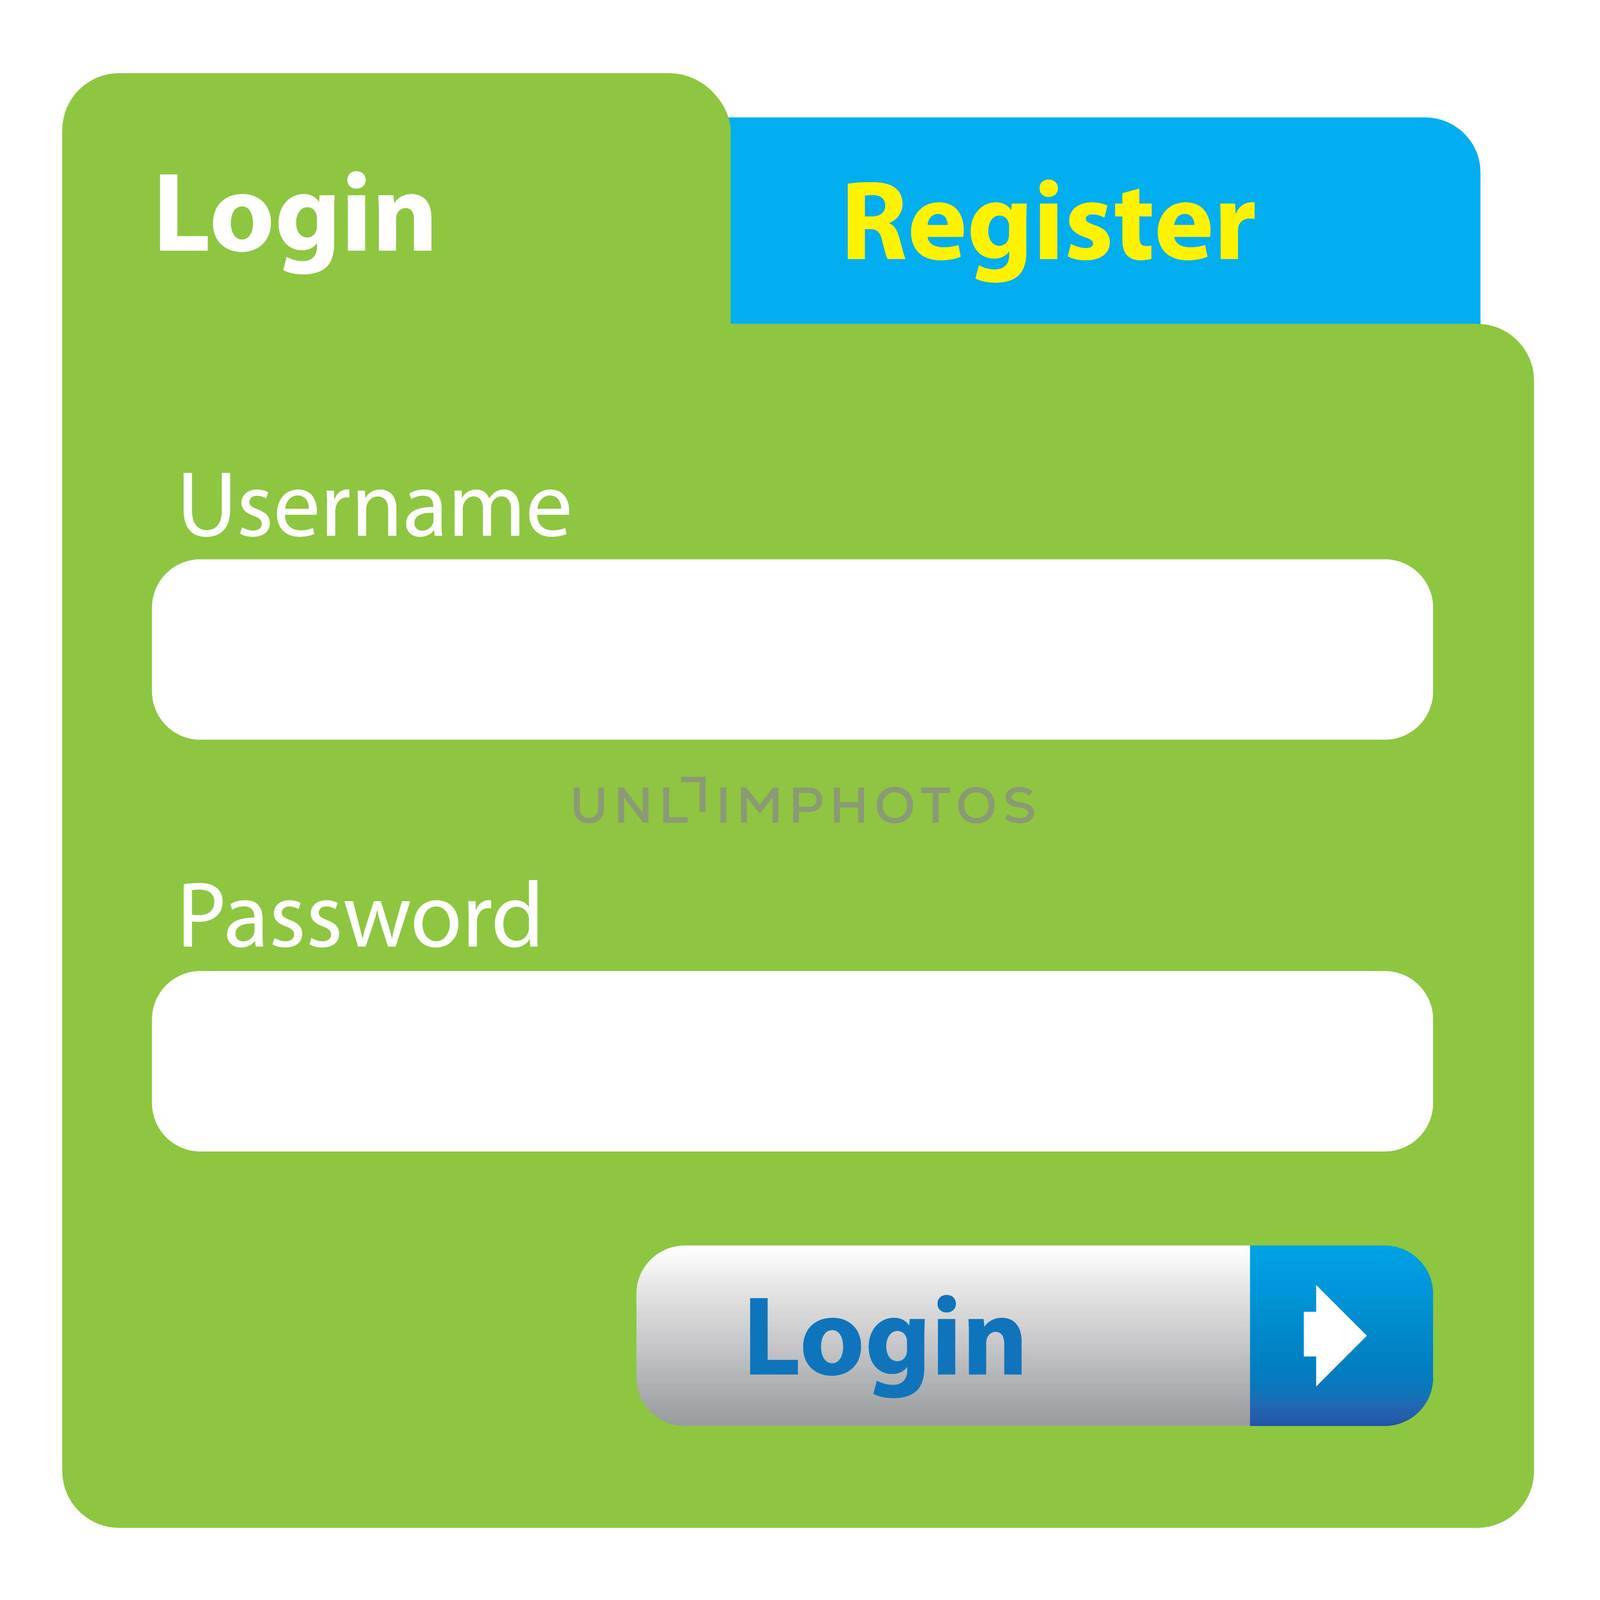 Illustrated login interface - username and password by DragonEyeMedia